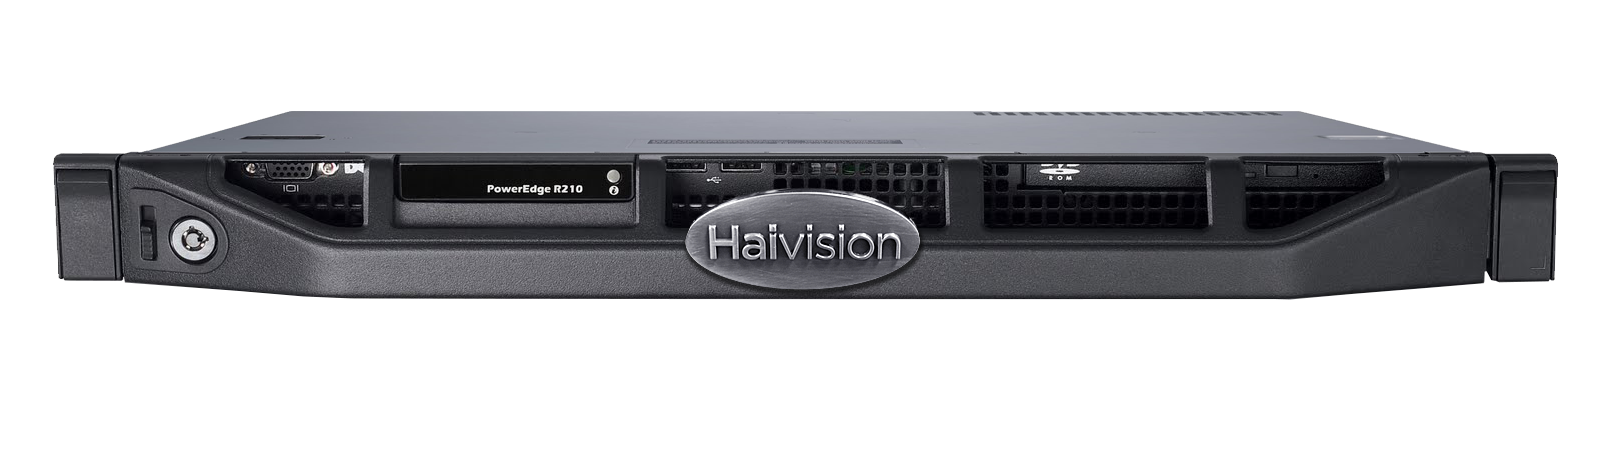 Dell R210 Server Low View